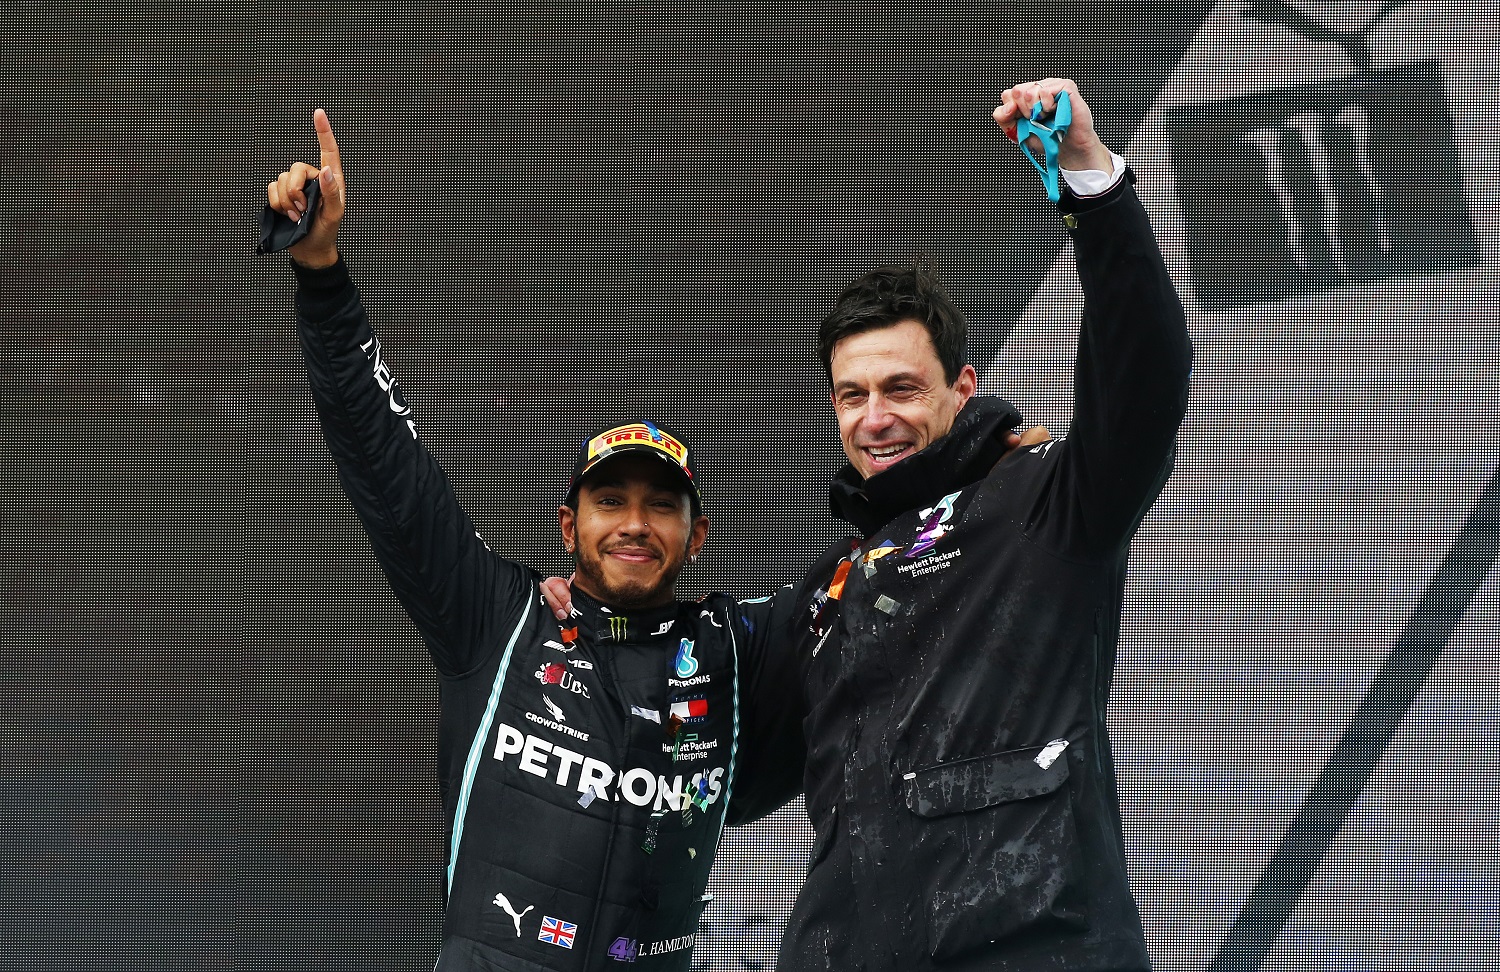 Lewis Hamilton of Mercedes GP celebrates winning a seventh Formula 1 World Drivers' Championship with team principal Toto Wolff on the podium after the Grand Prix of Turkey on Nov. 15, 2020.